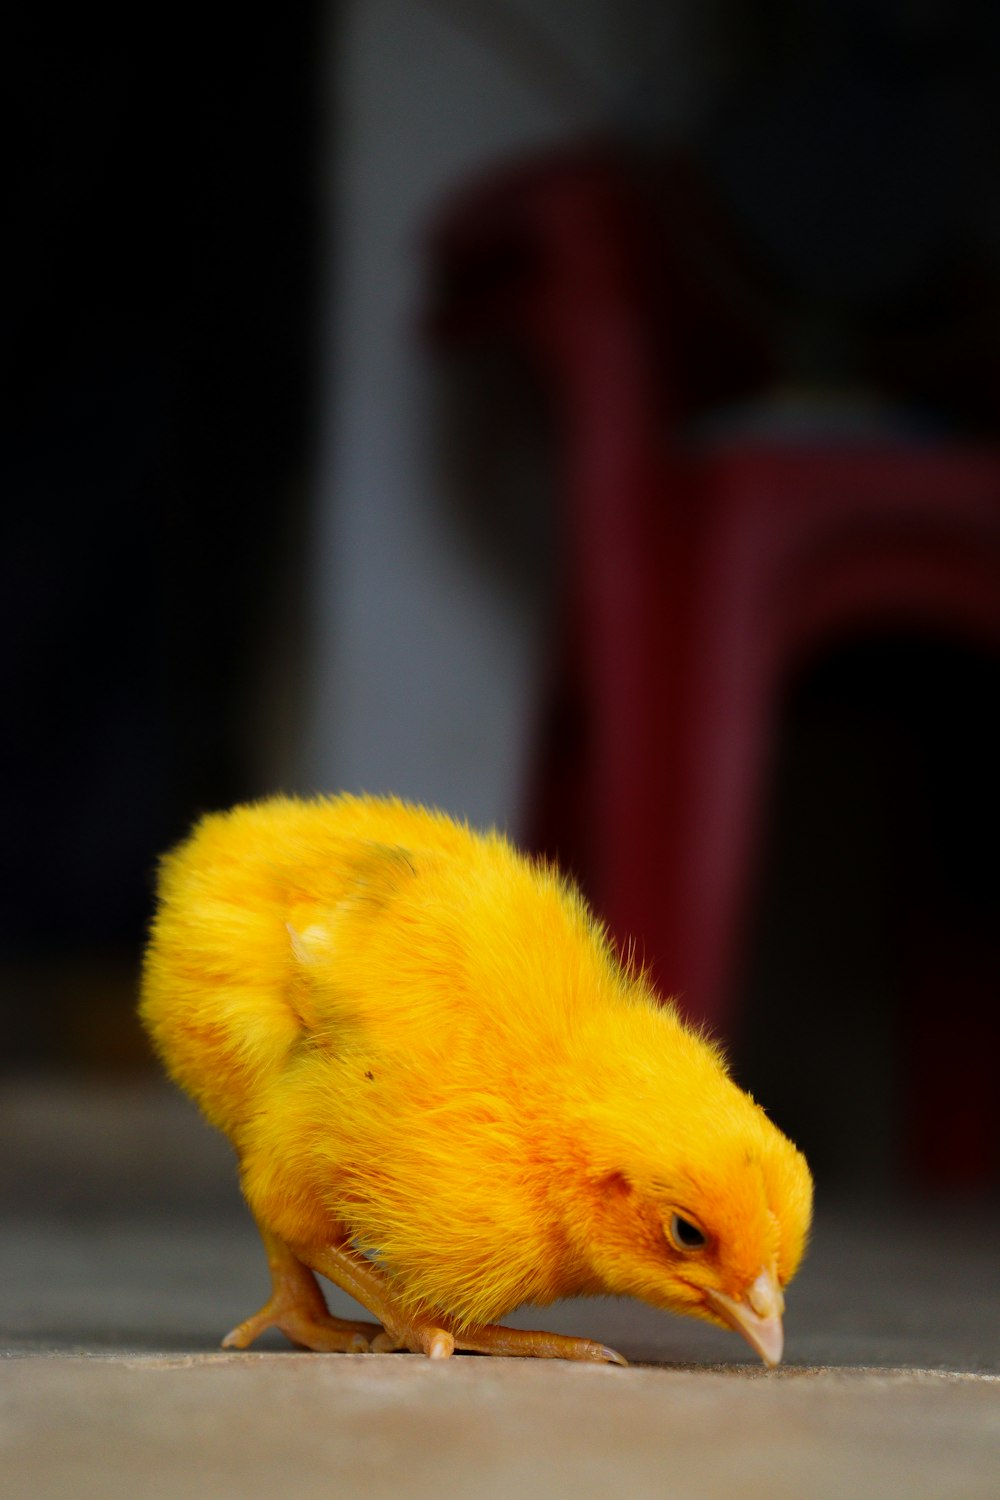 a small yellow bird standing on the ground